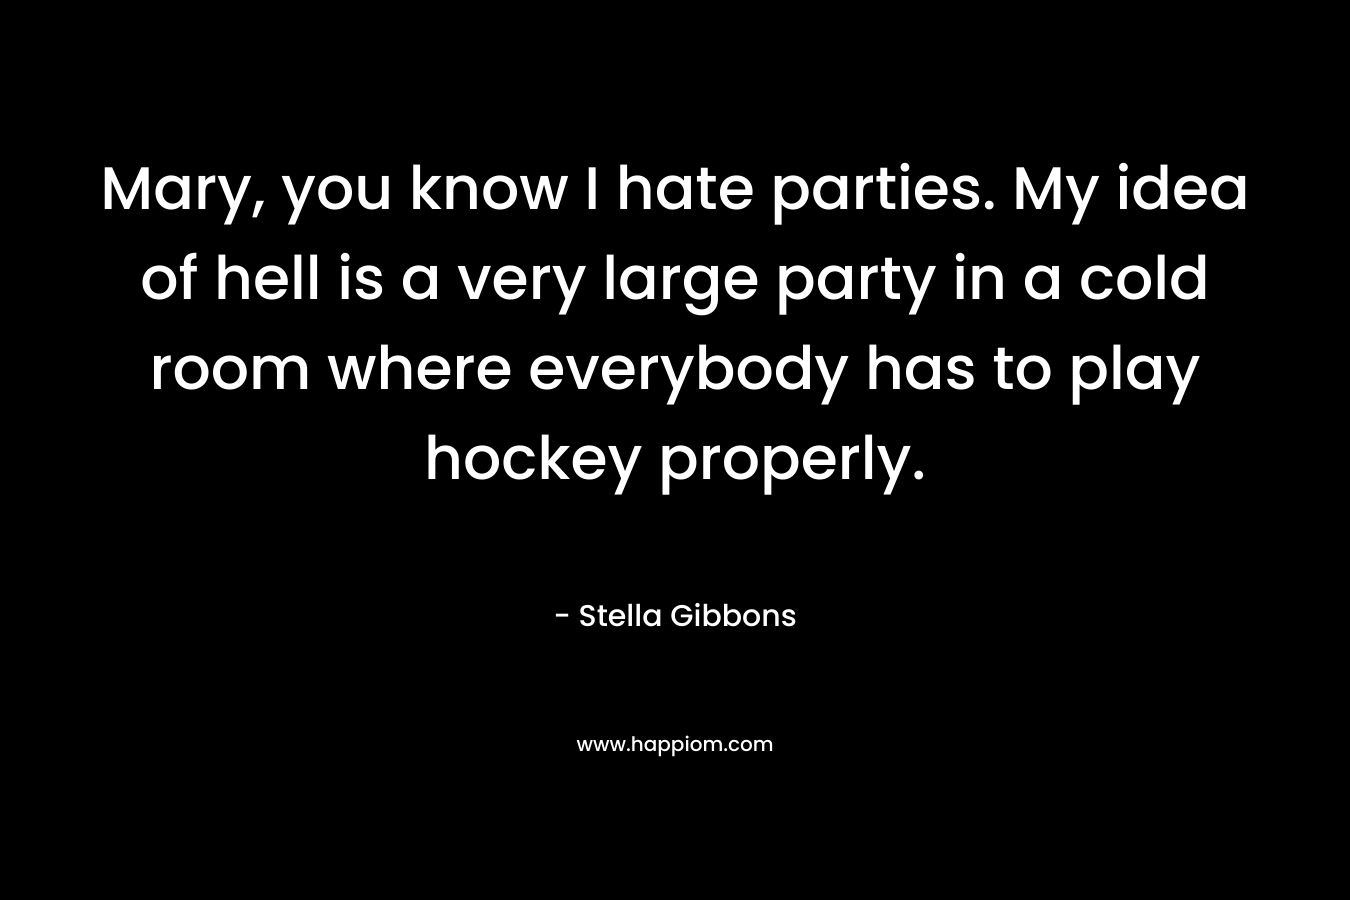 Mary, you know I hate parties. My idea of hell is a very large party in a cold room where everybody has to play hockey properly.